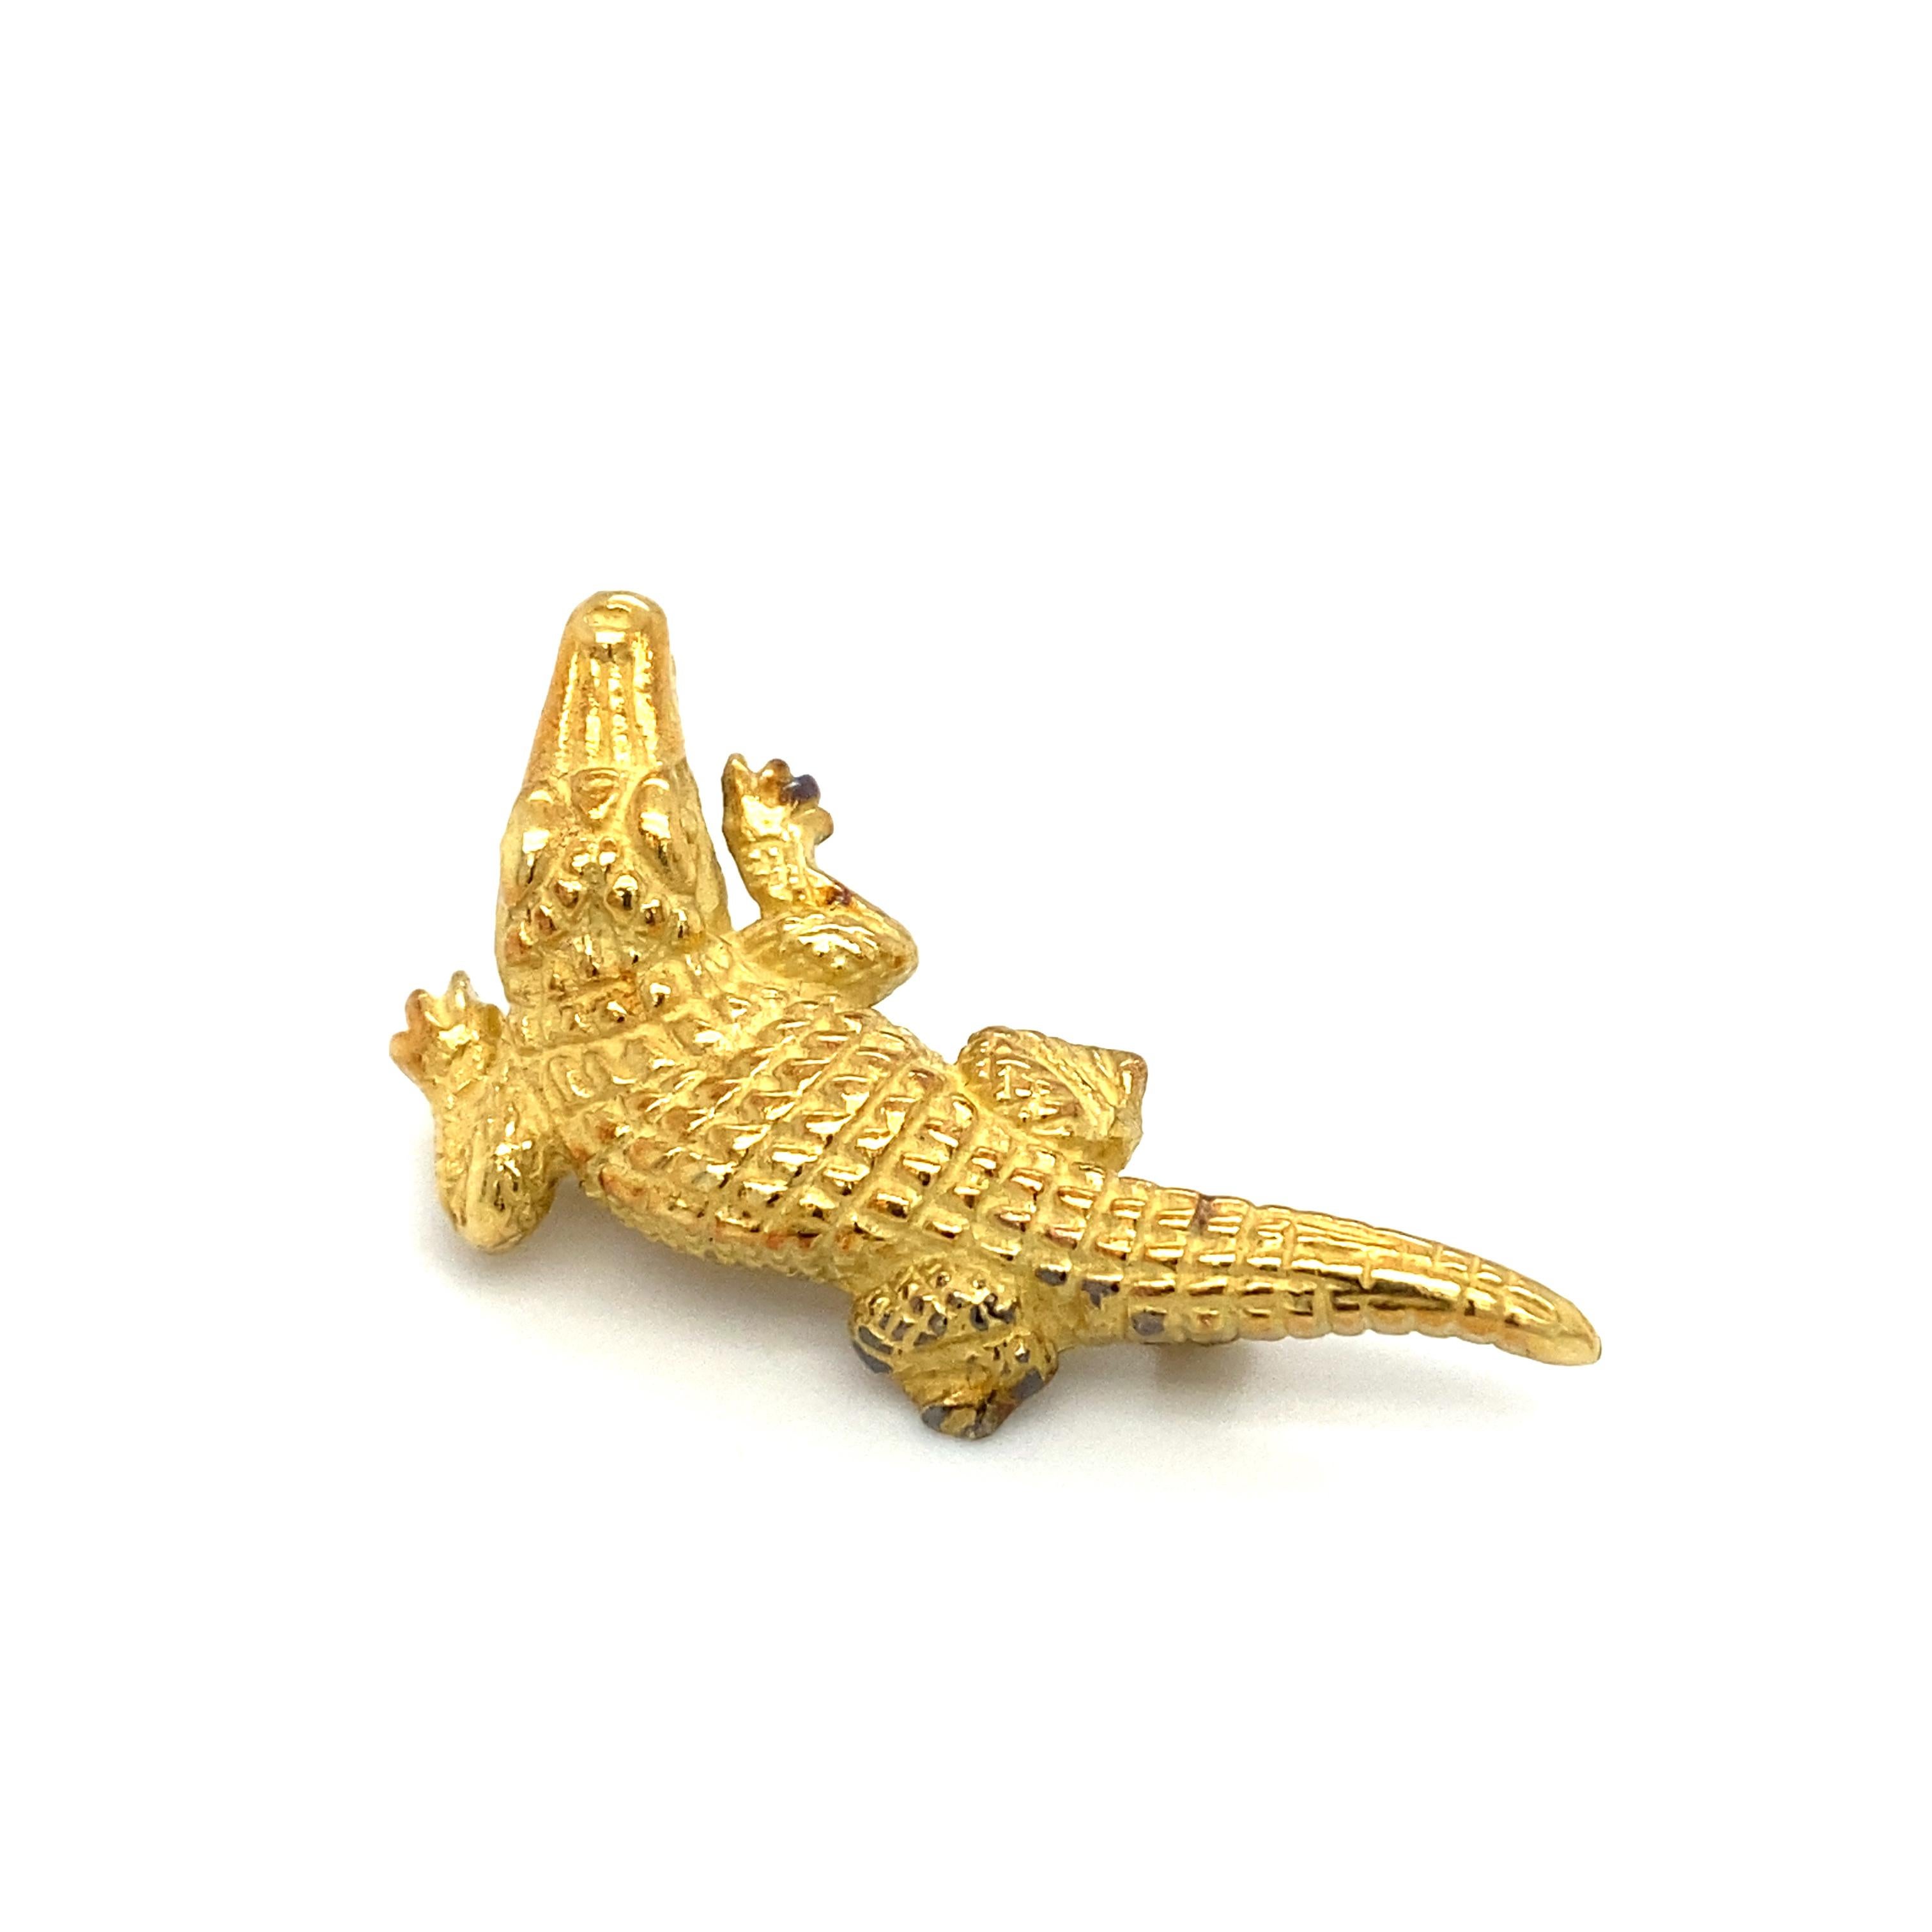 Item Details: This whimsical alligator brooch is finely crafted in 18 Karat Yellow Gold. It features textured gold to display the scales on the alligator's body. Very well crafted brooch!

Circa: 1960s
Metal Type: 18 Karat Yellow Gold
Weight: 8.8